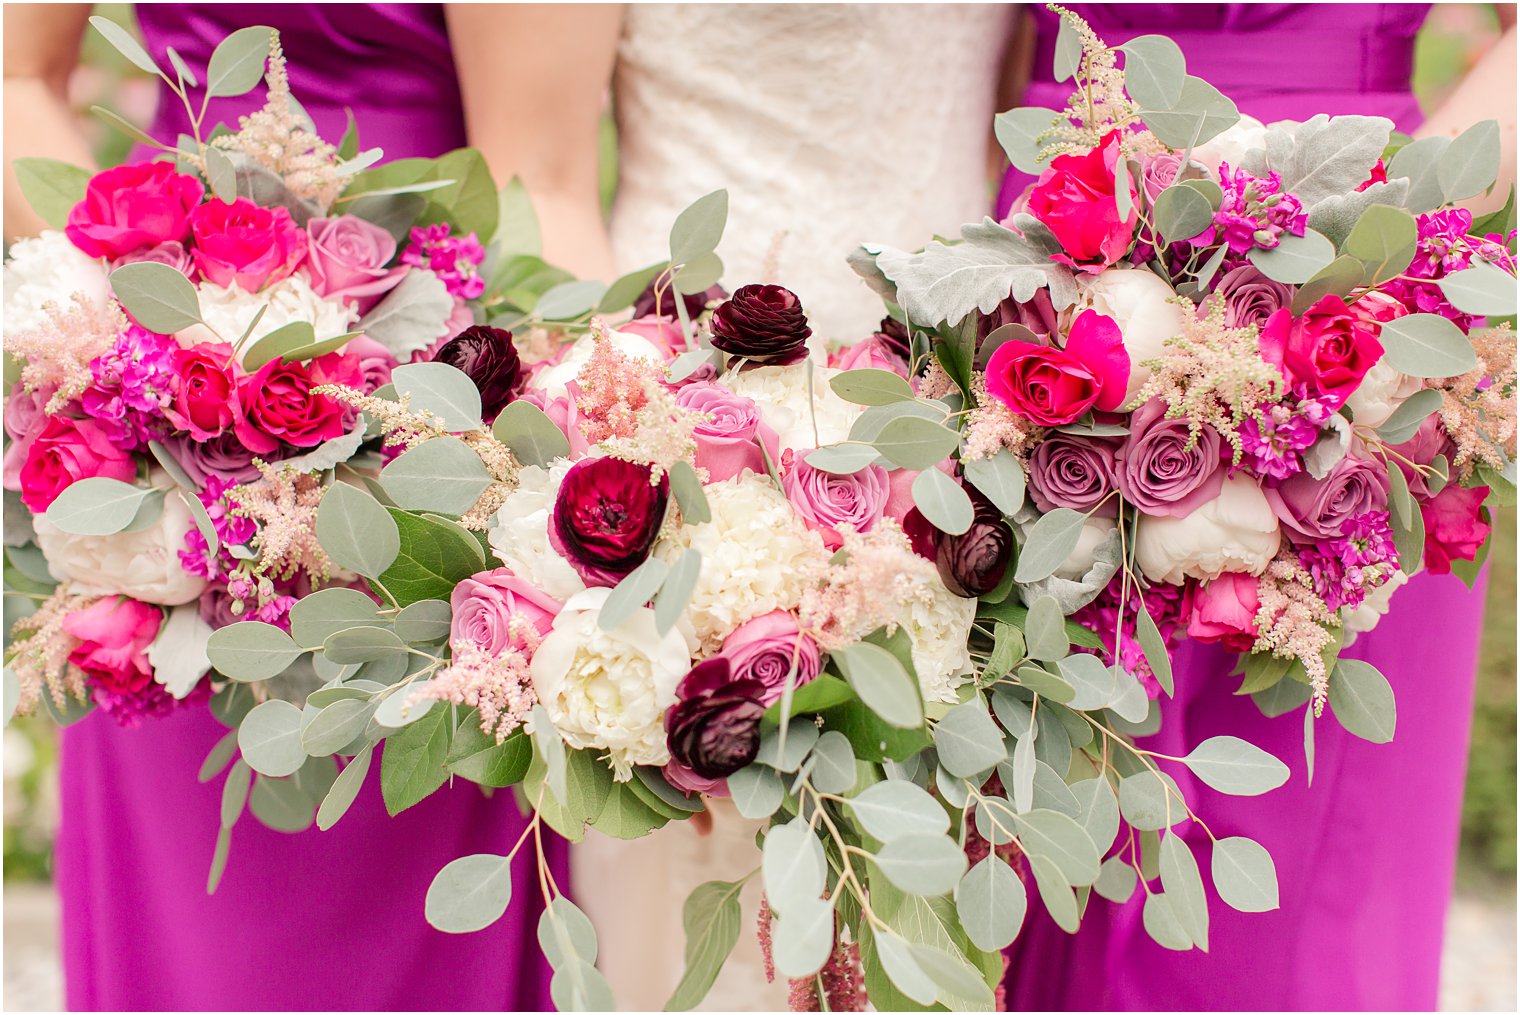 Colorful bouquets by Florals by Kim